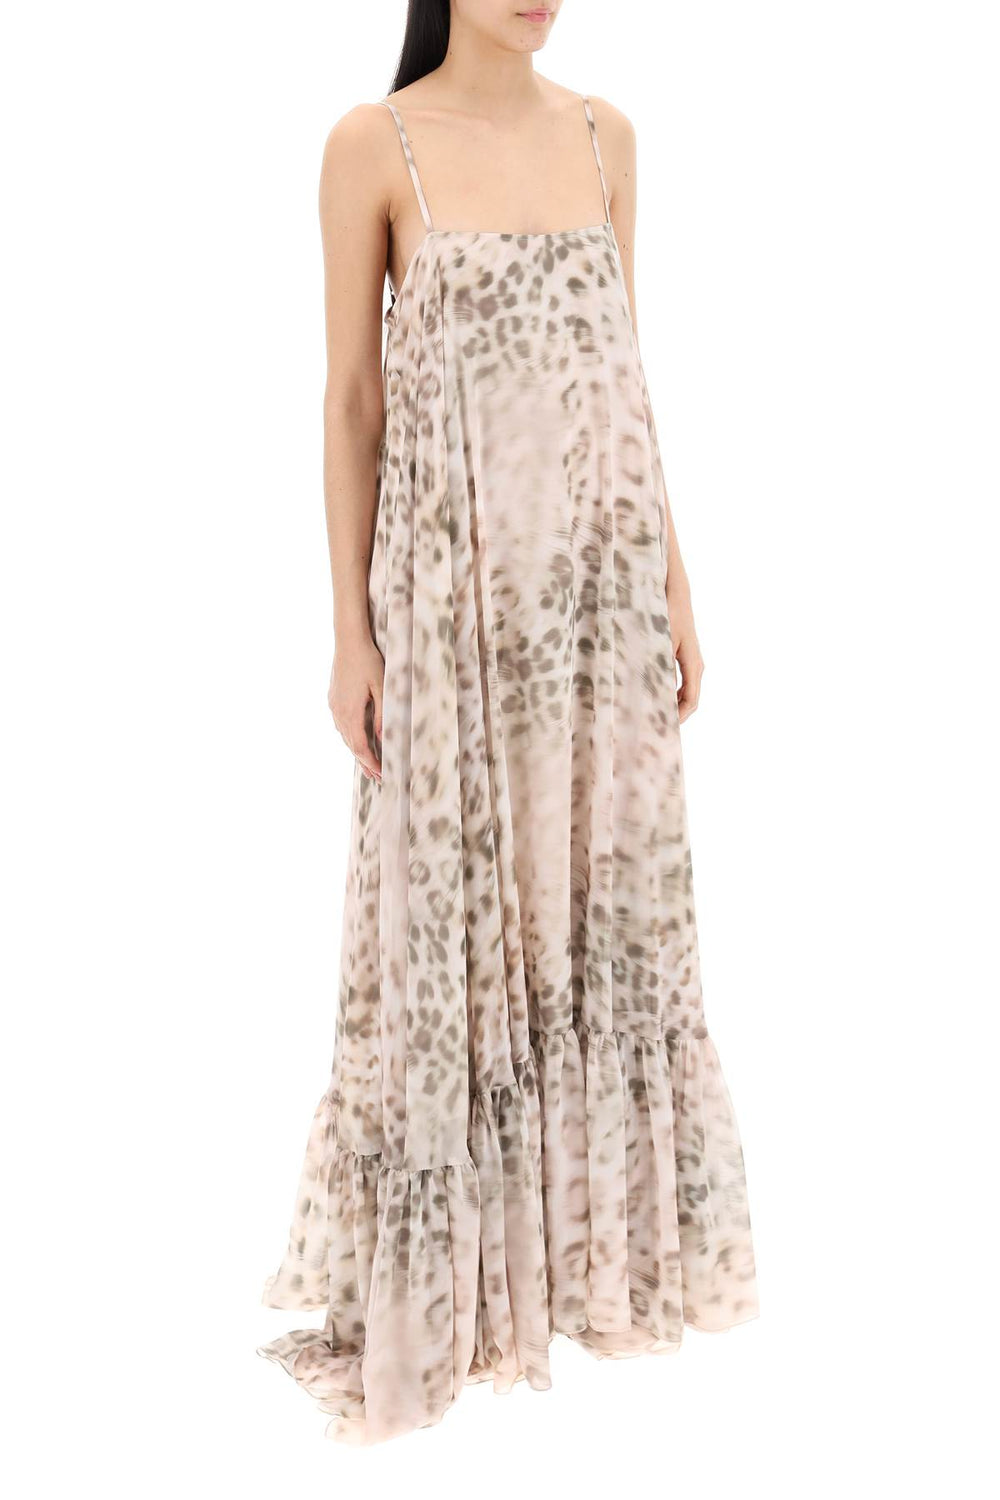 maxi dress with ruffle at the-1